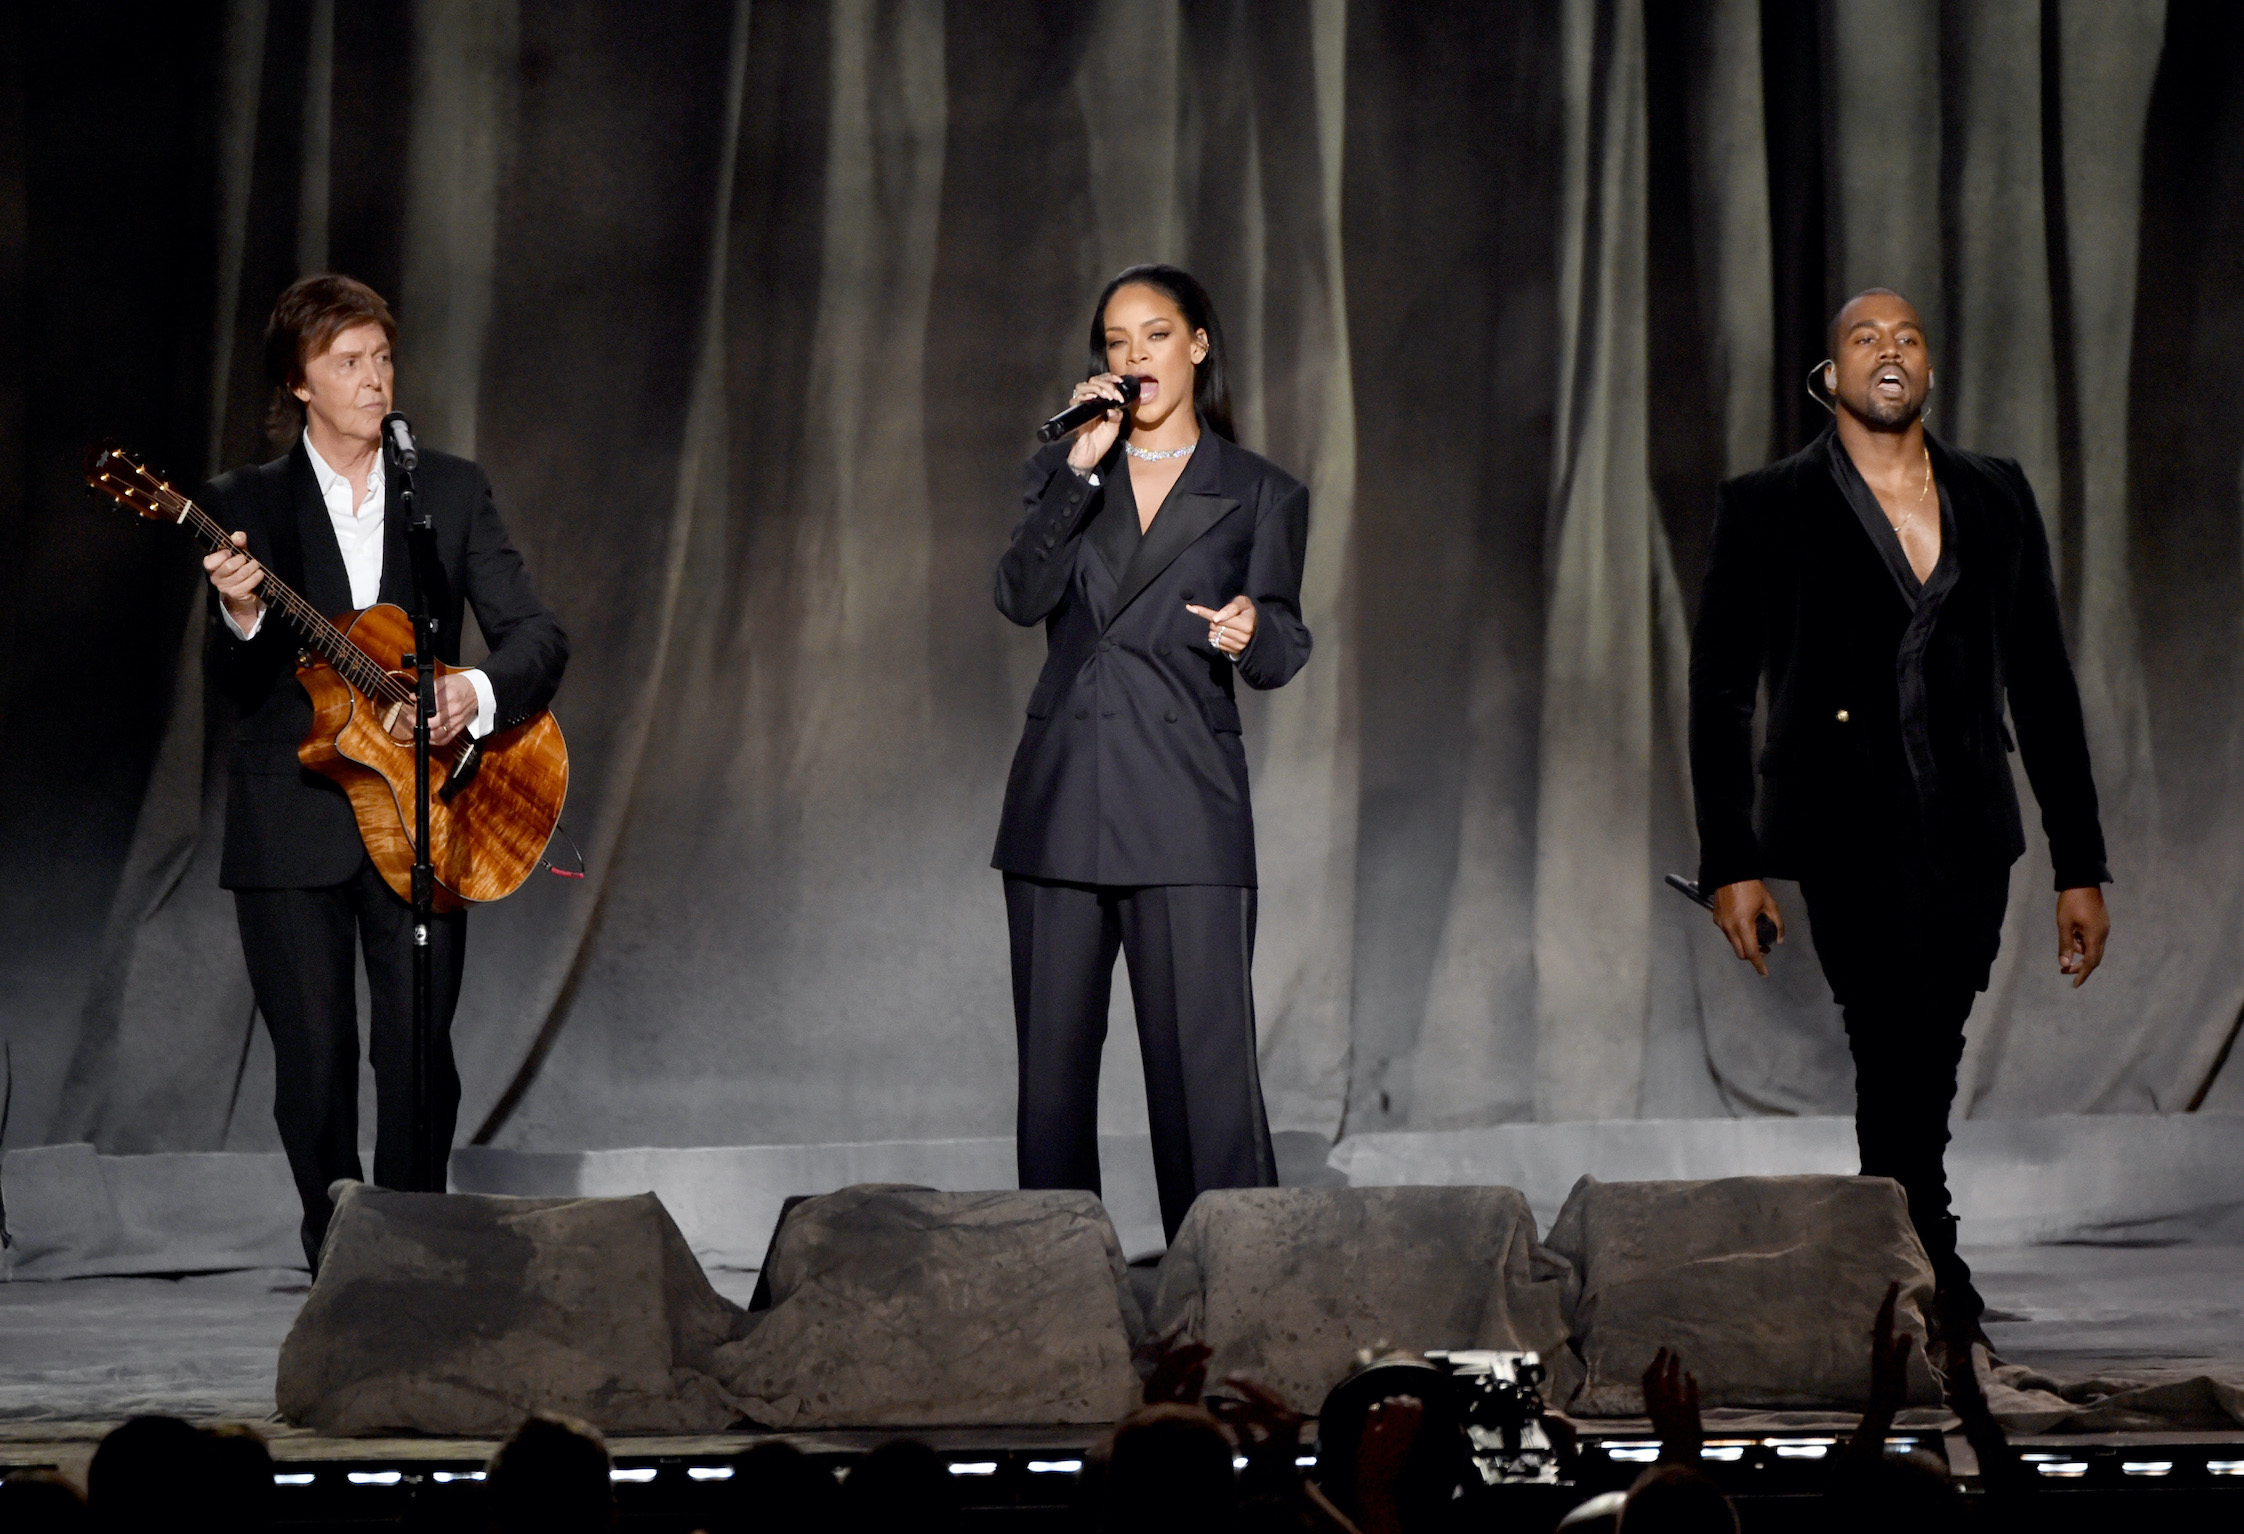 Paul McCartney, Rihanna, and Kanye West perform onstage at the 57th Annual Grammy Awards